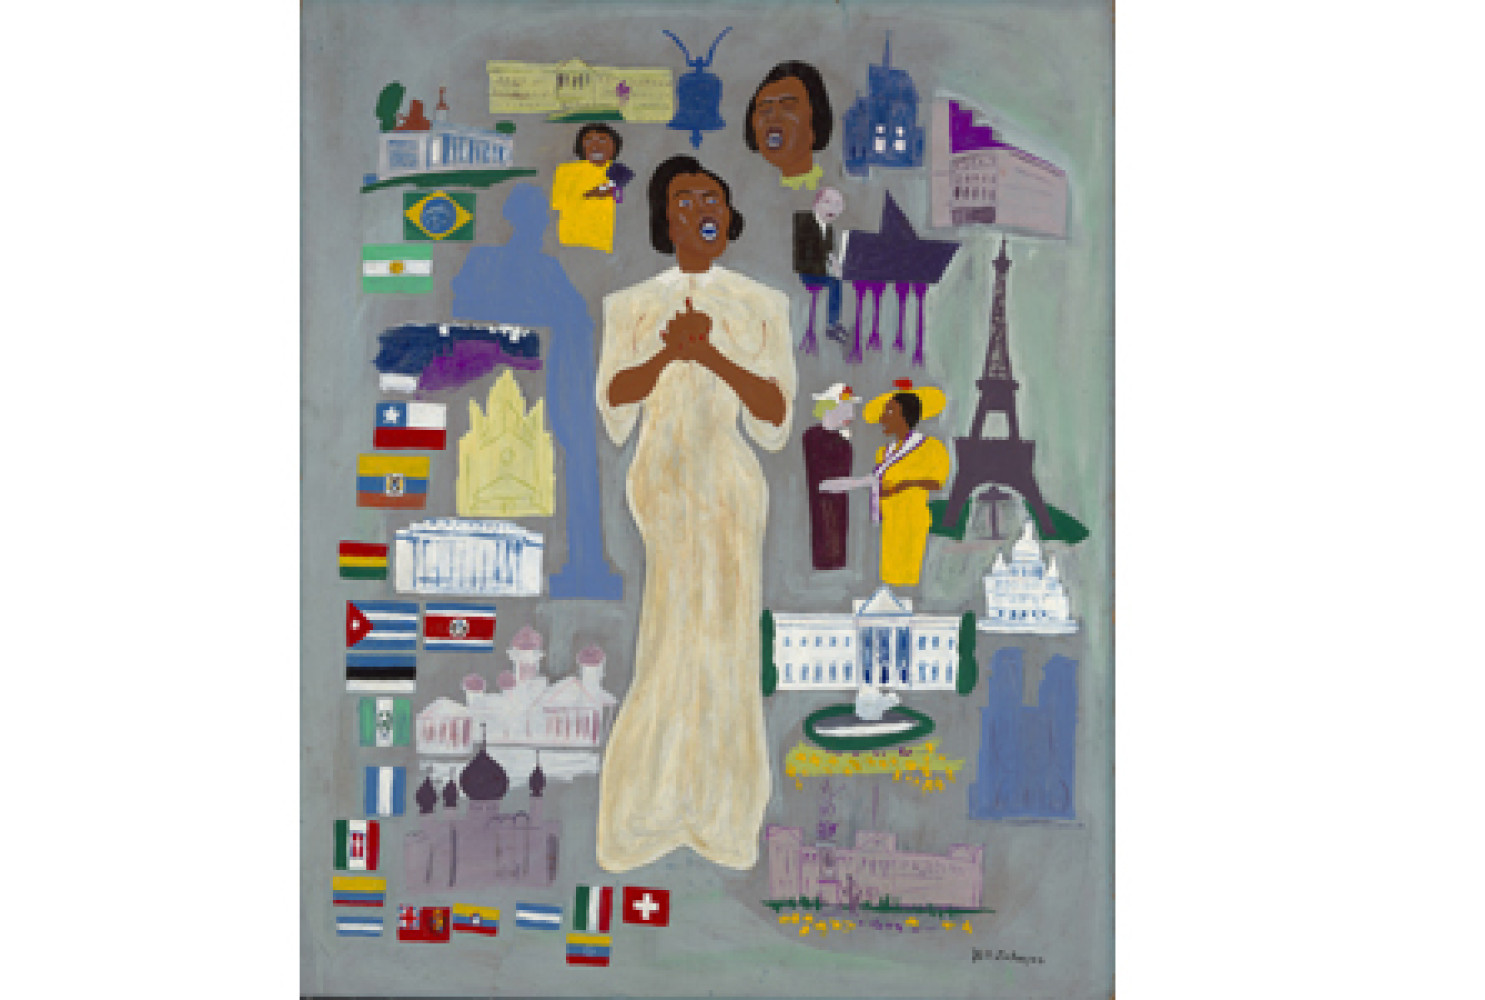 Marian Anderson, ca. 1945, by William H. Johnson (American, 1901-1970). Oil on paperboard, 35 5/8 x 28 7/8 inches. Image courtesy of Smithsonian American Art Museum.